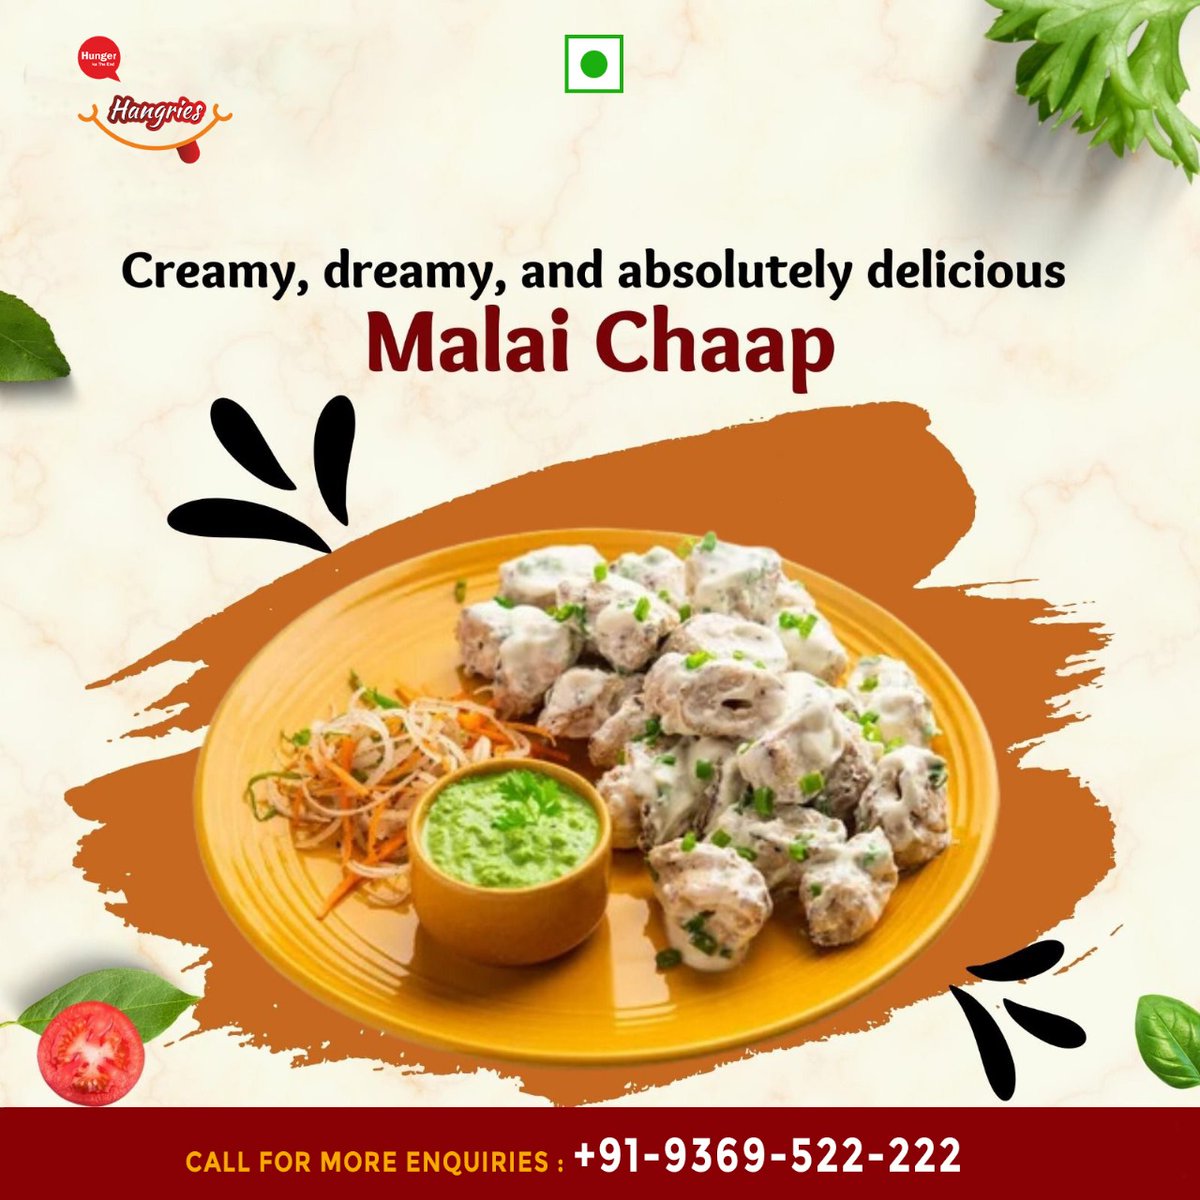 Experience the rich, creamy texture and tantalizing flavors that will appease your hunger pangs and leave you craving for more.

#hangries #malaichaap #fastfood #foodie #tastesensation #foodieheaven #foodieadventure #indulgeinflavor #foodlove #yummy #ınstafood #foodstagrams